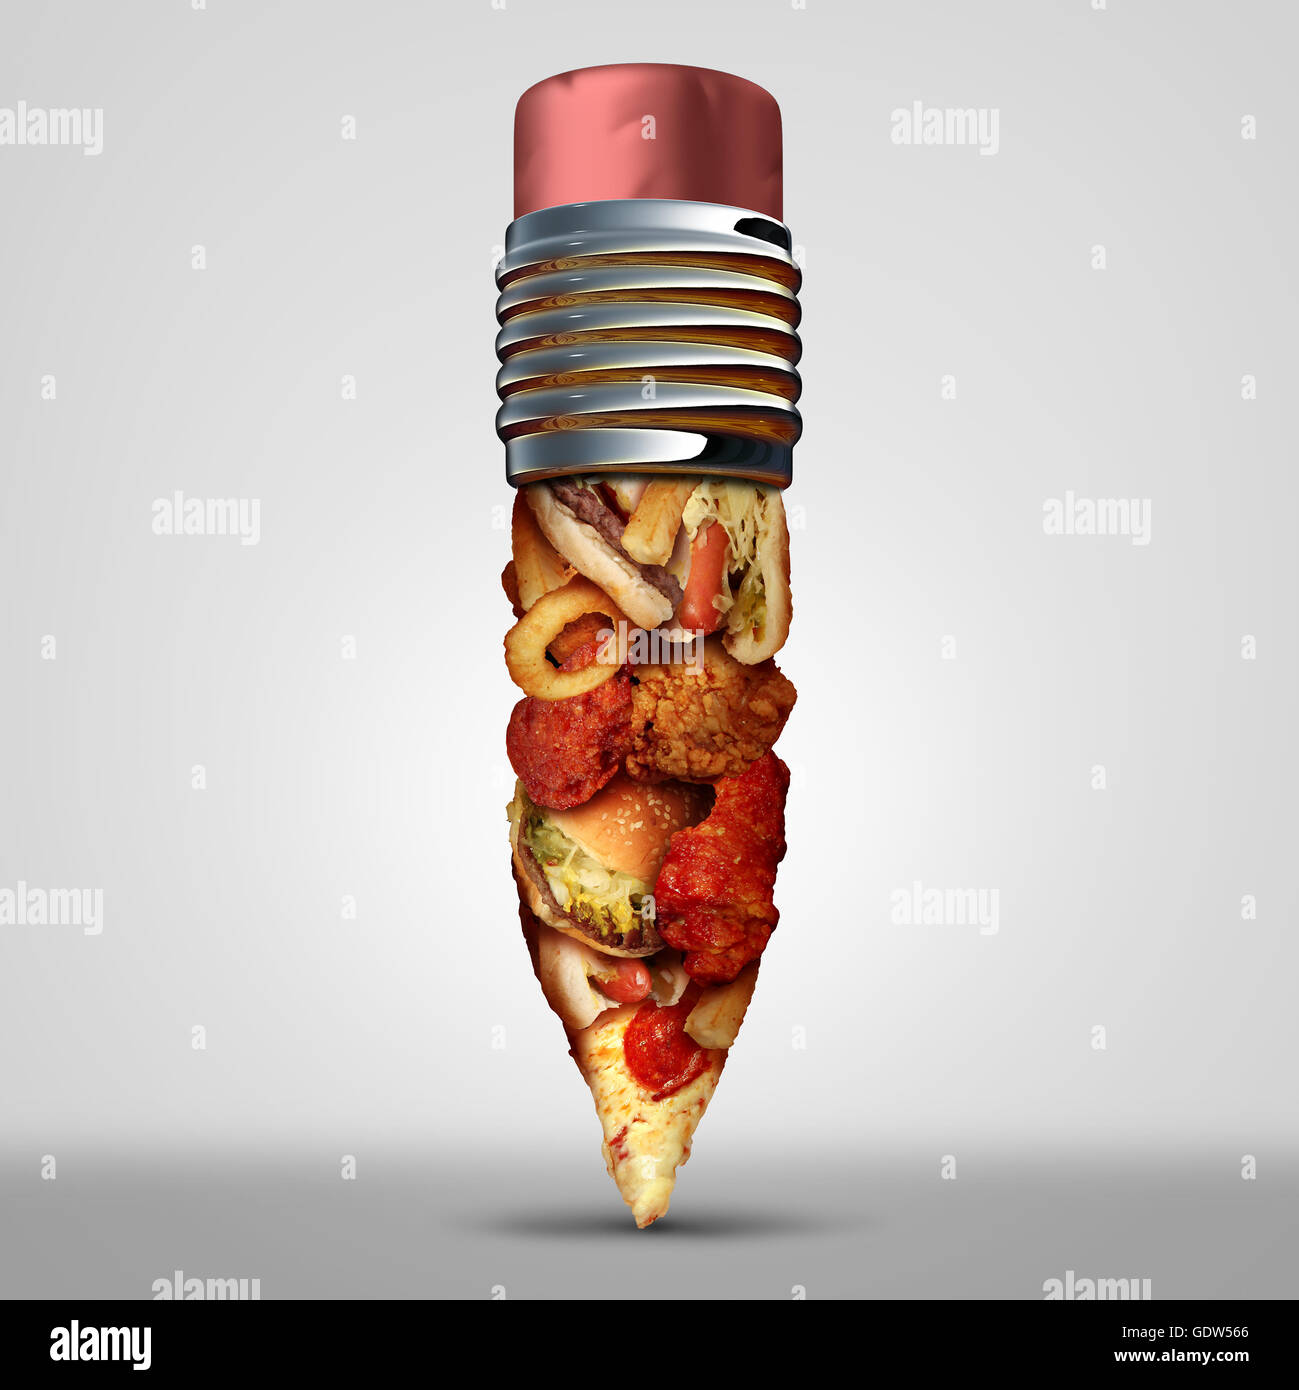 Eating fat education idea and diet plan problems or obesity crisis in the school concept as a heap of unhealthy fast food shaped as a pencil as a nutrition risk symbol for the youth with 3D illustration elements. Stock Photo